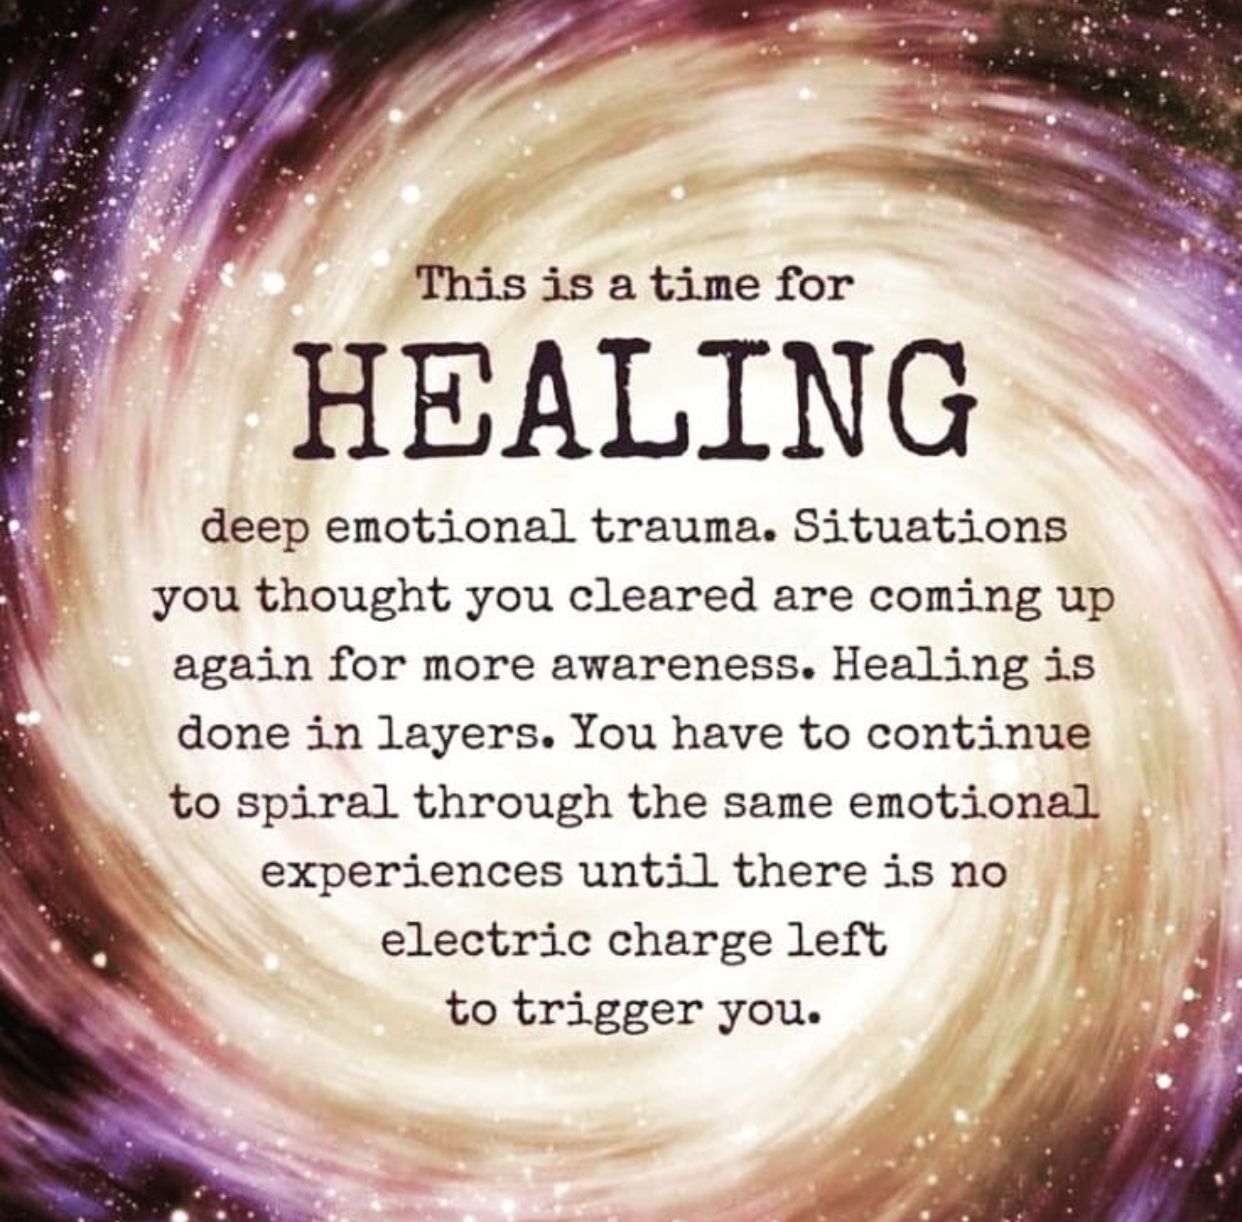 Healing quotes time takes heal hurt quotesgram